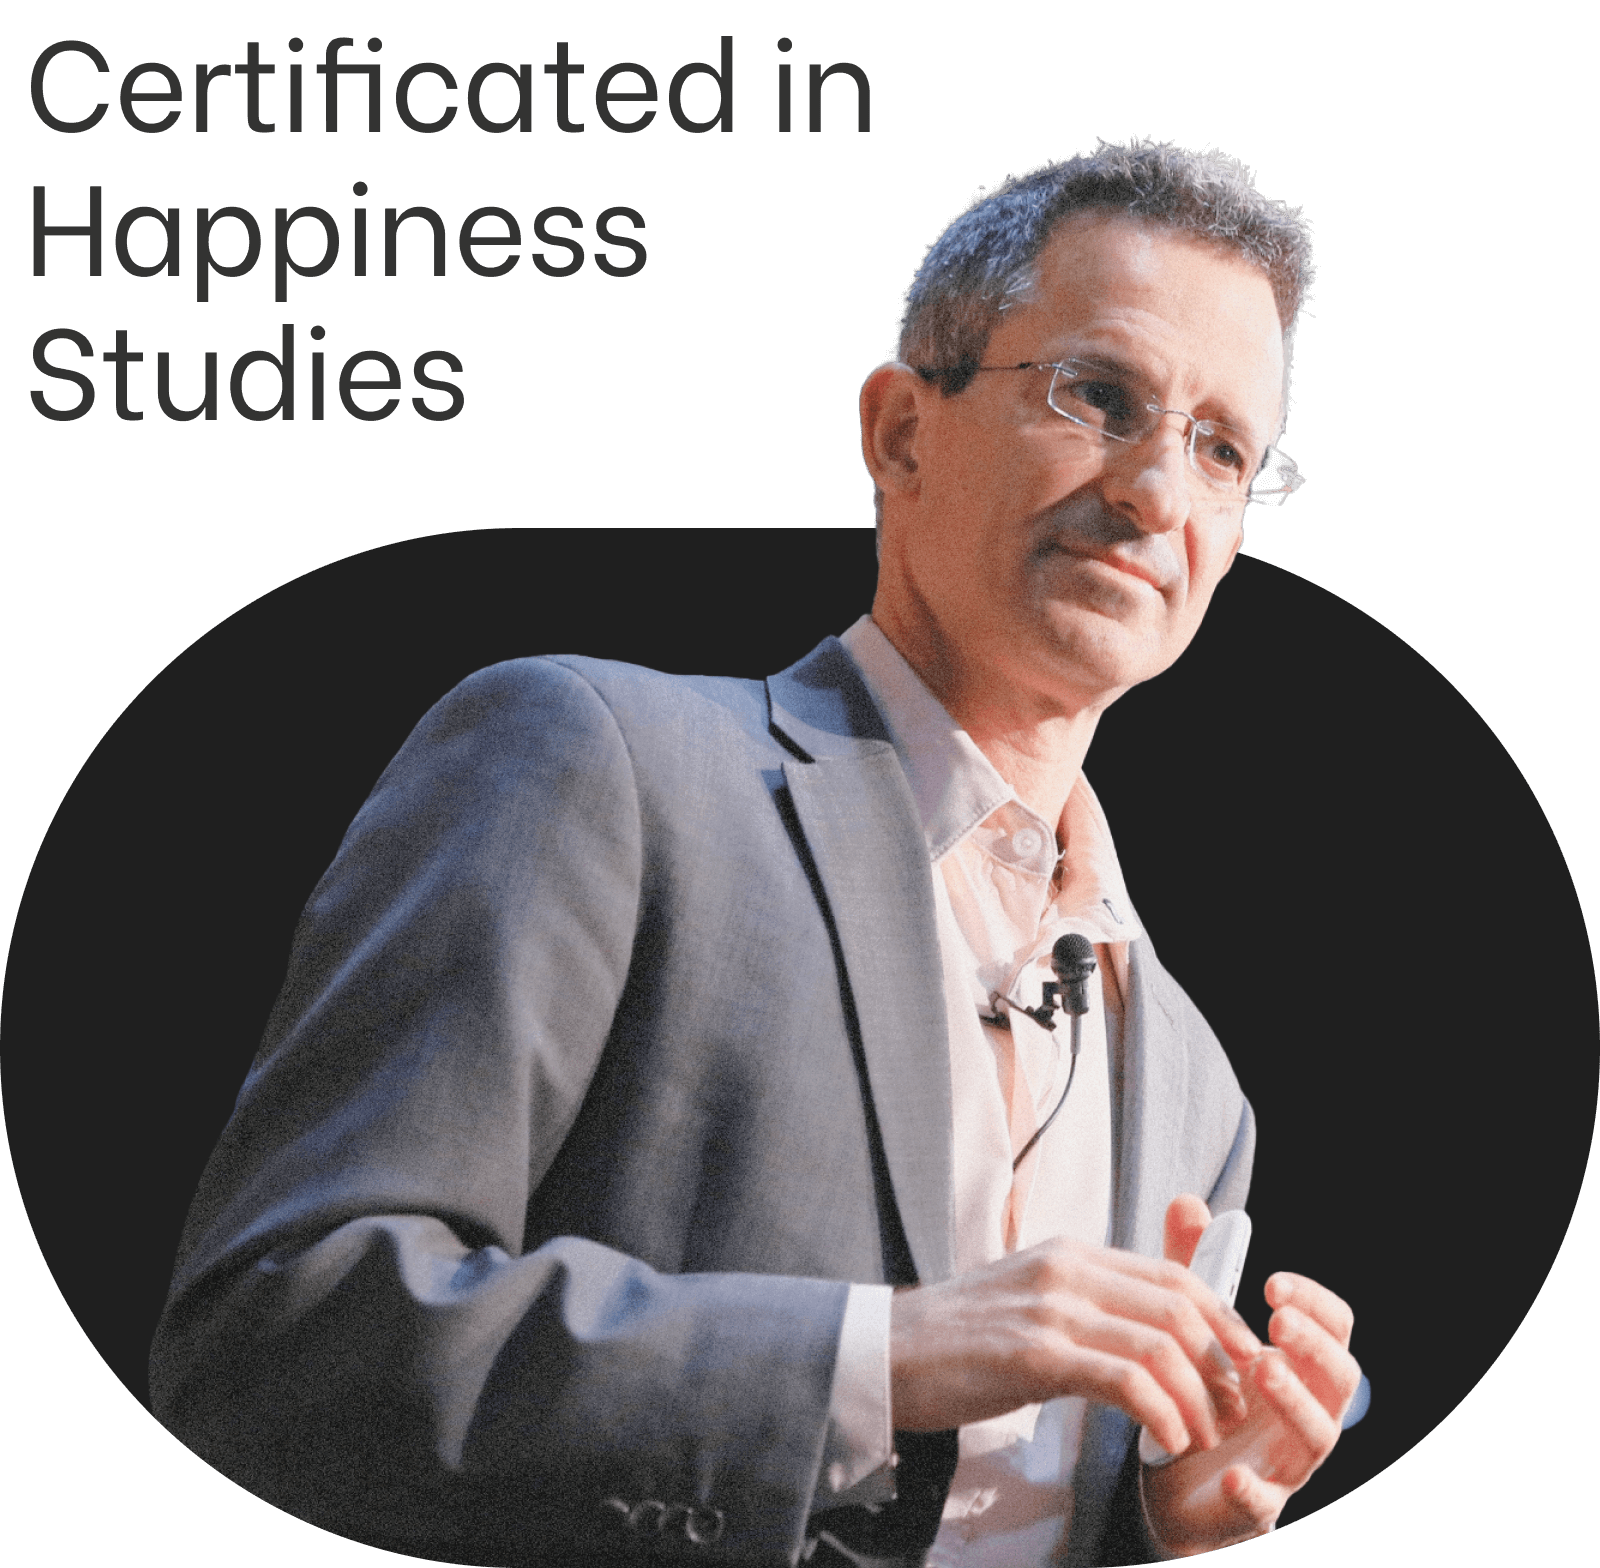 Certificated in Happiness Studies